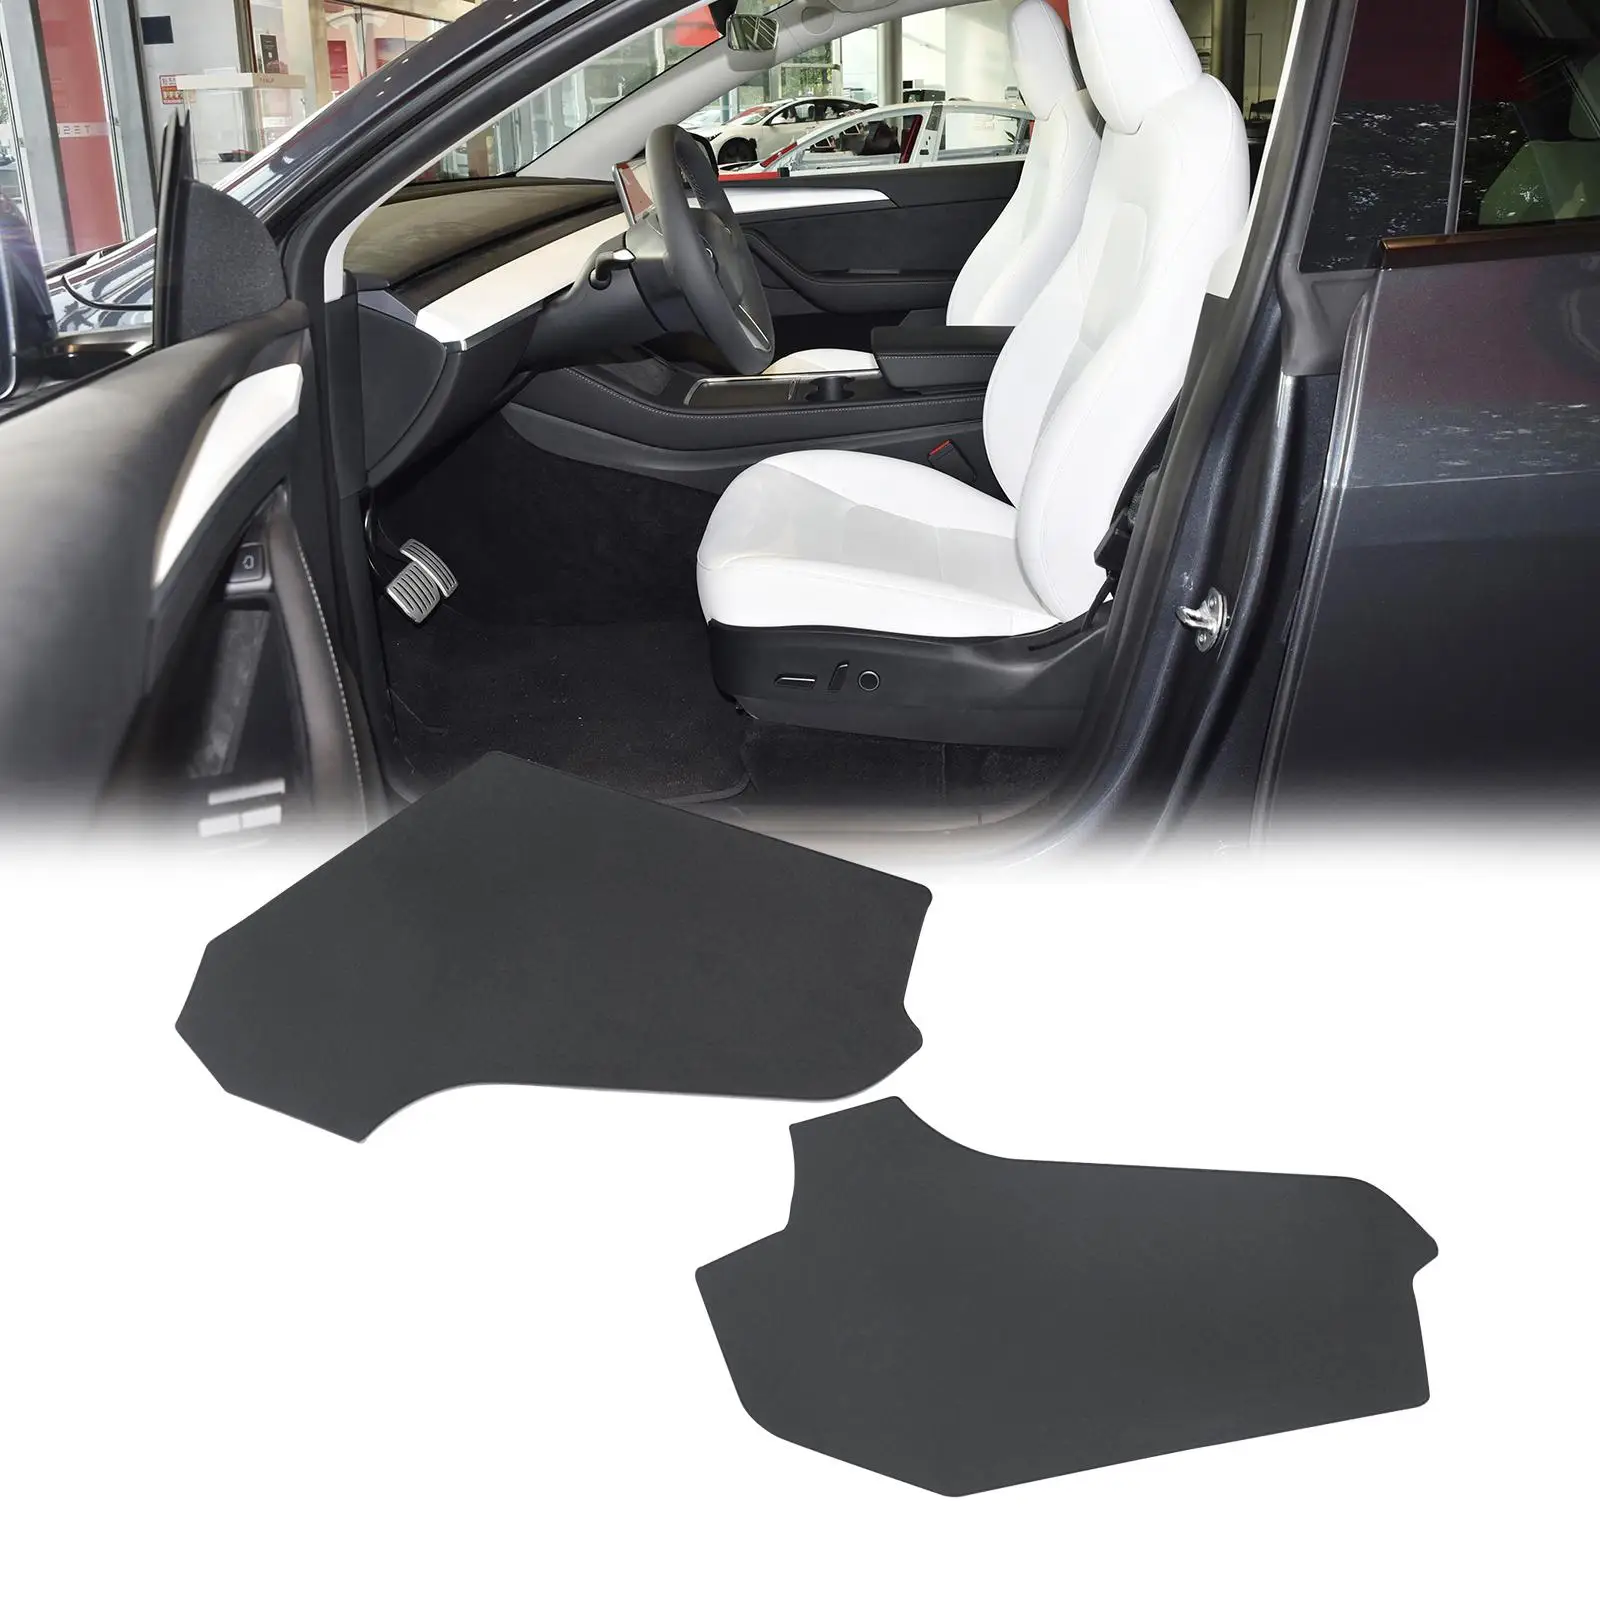 2x Center Console Side Anti  Replaces Spare Parts Anti Dust  Anti Kicking Pad Durable for 